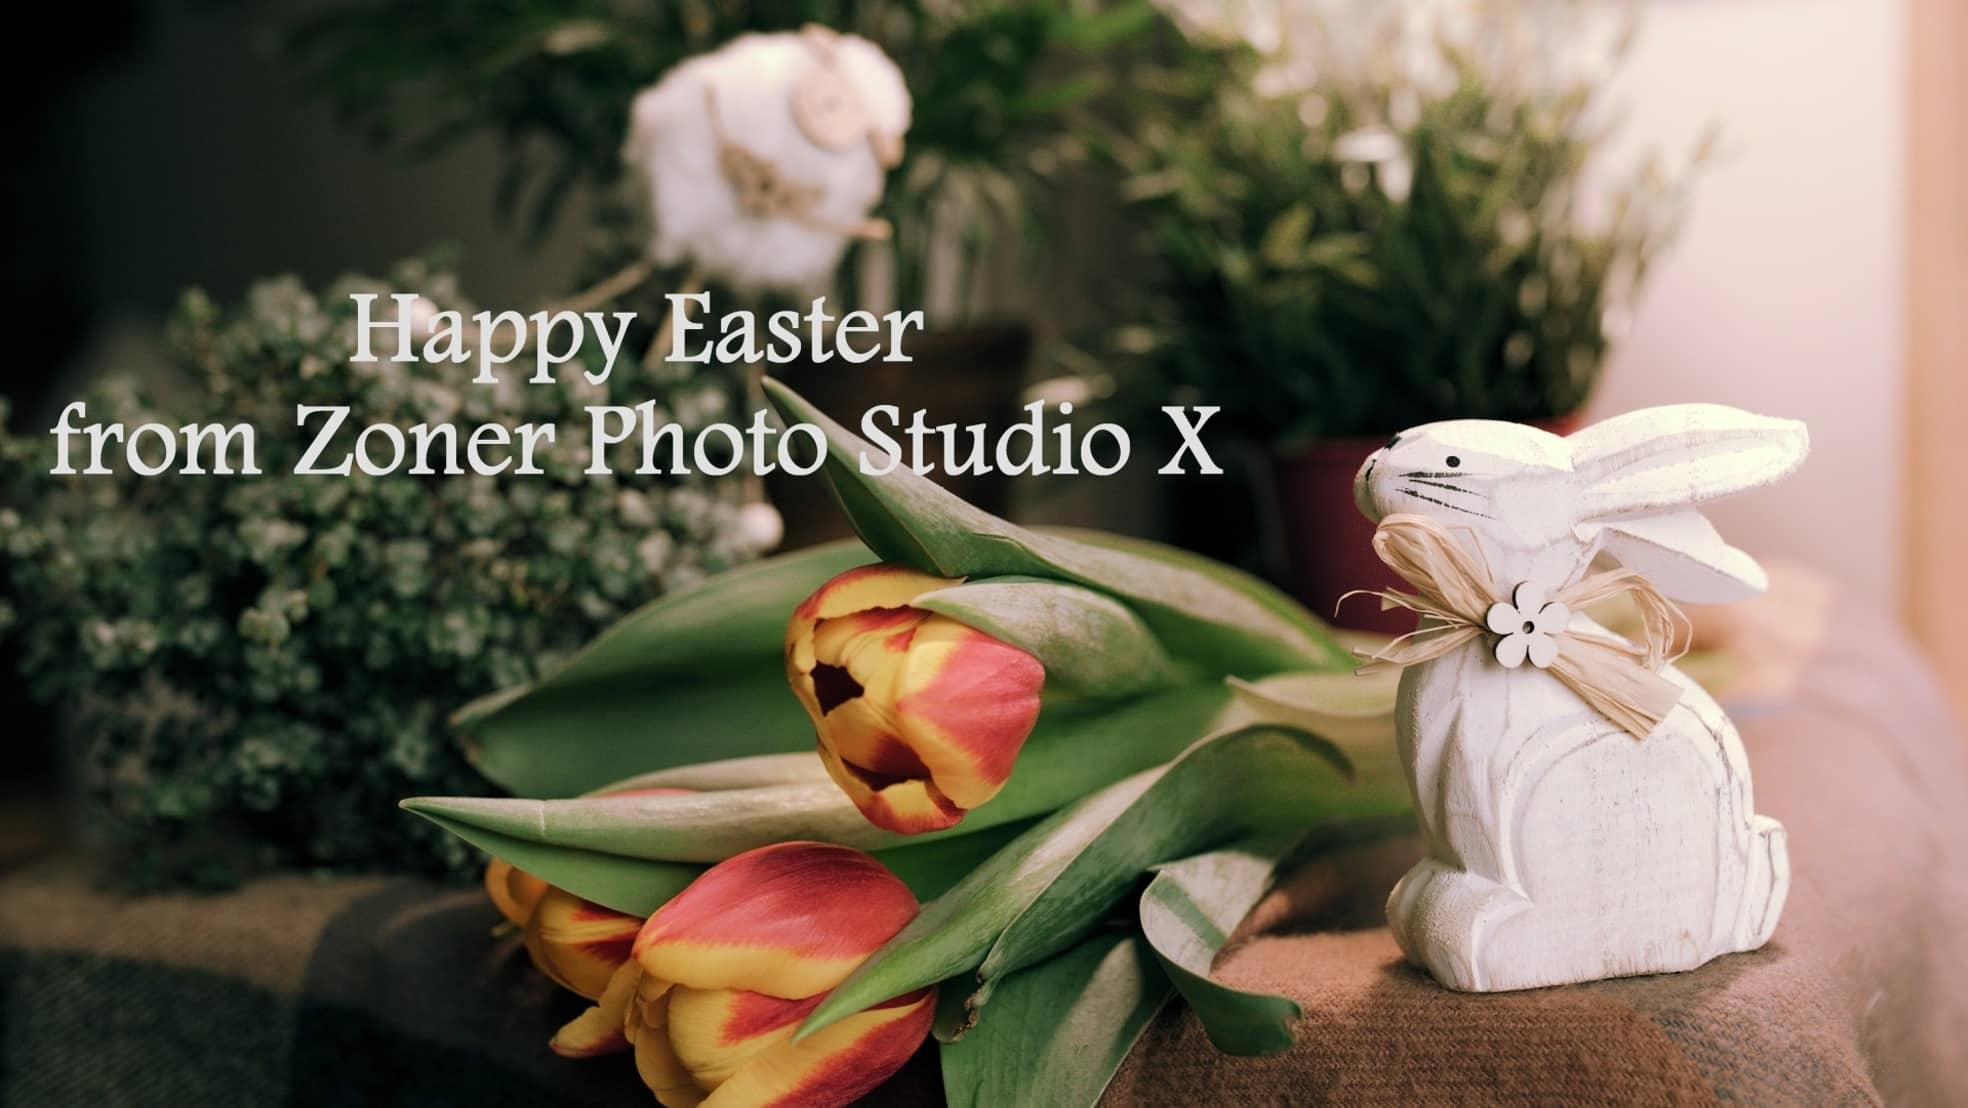 Make an Easter Greeting Card with Your Own Photos